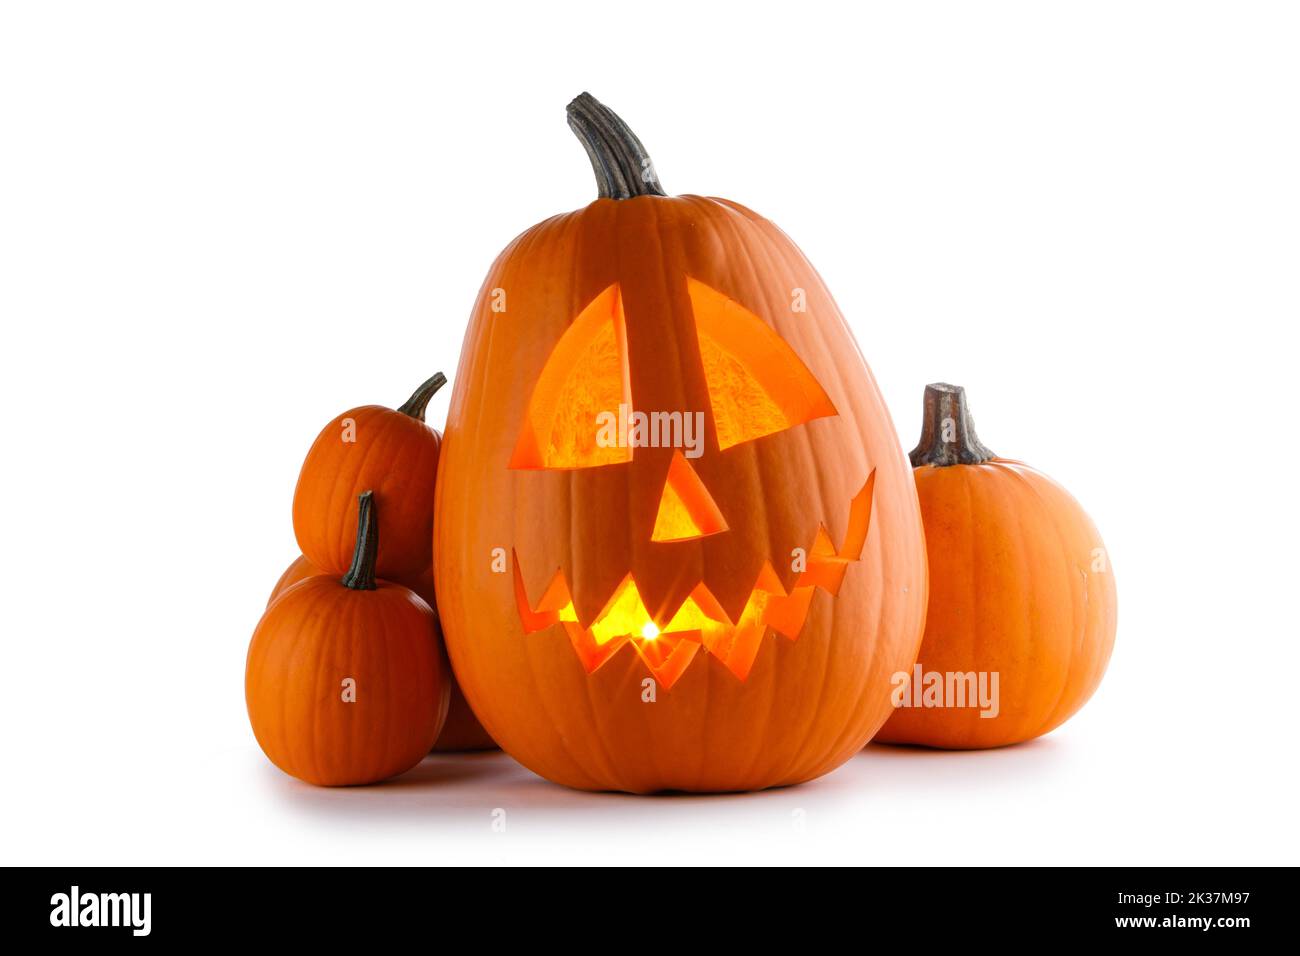 Halloween pumpkins isolated on white background, carved pumpkin with burning candle inside Stock Photo